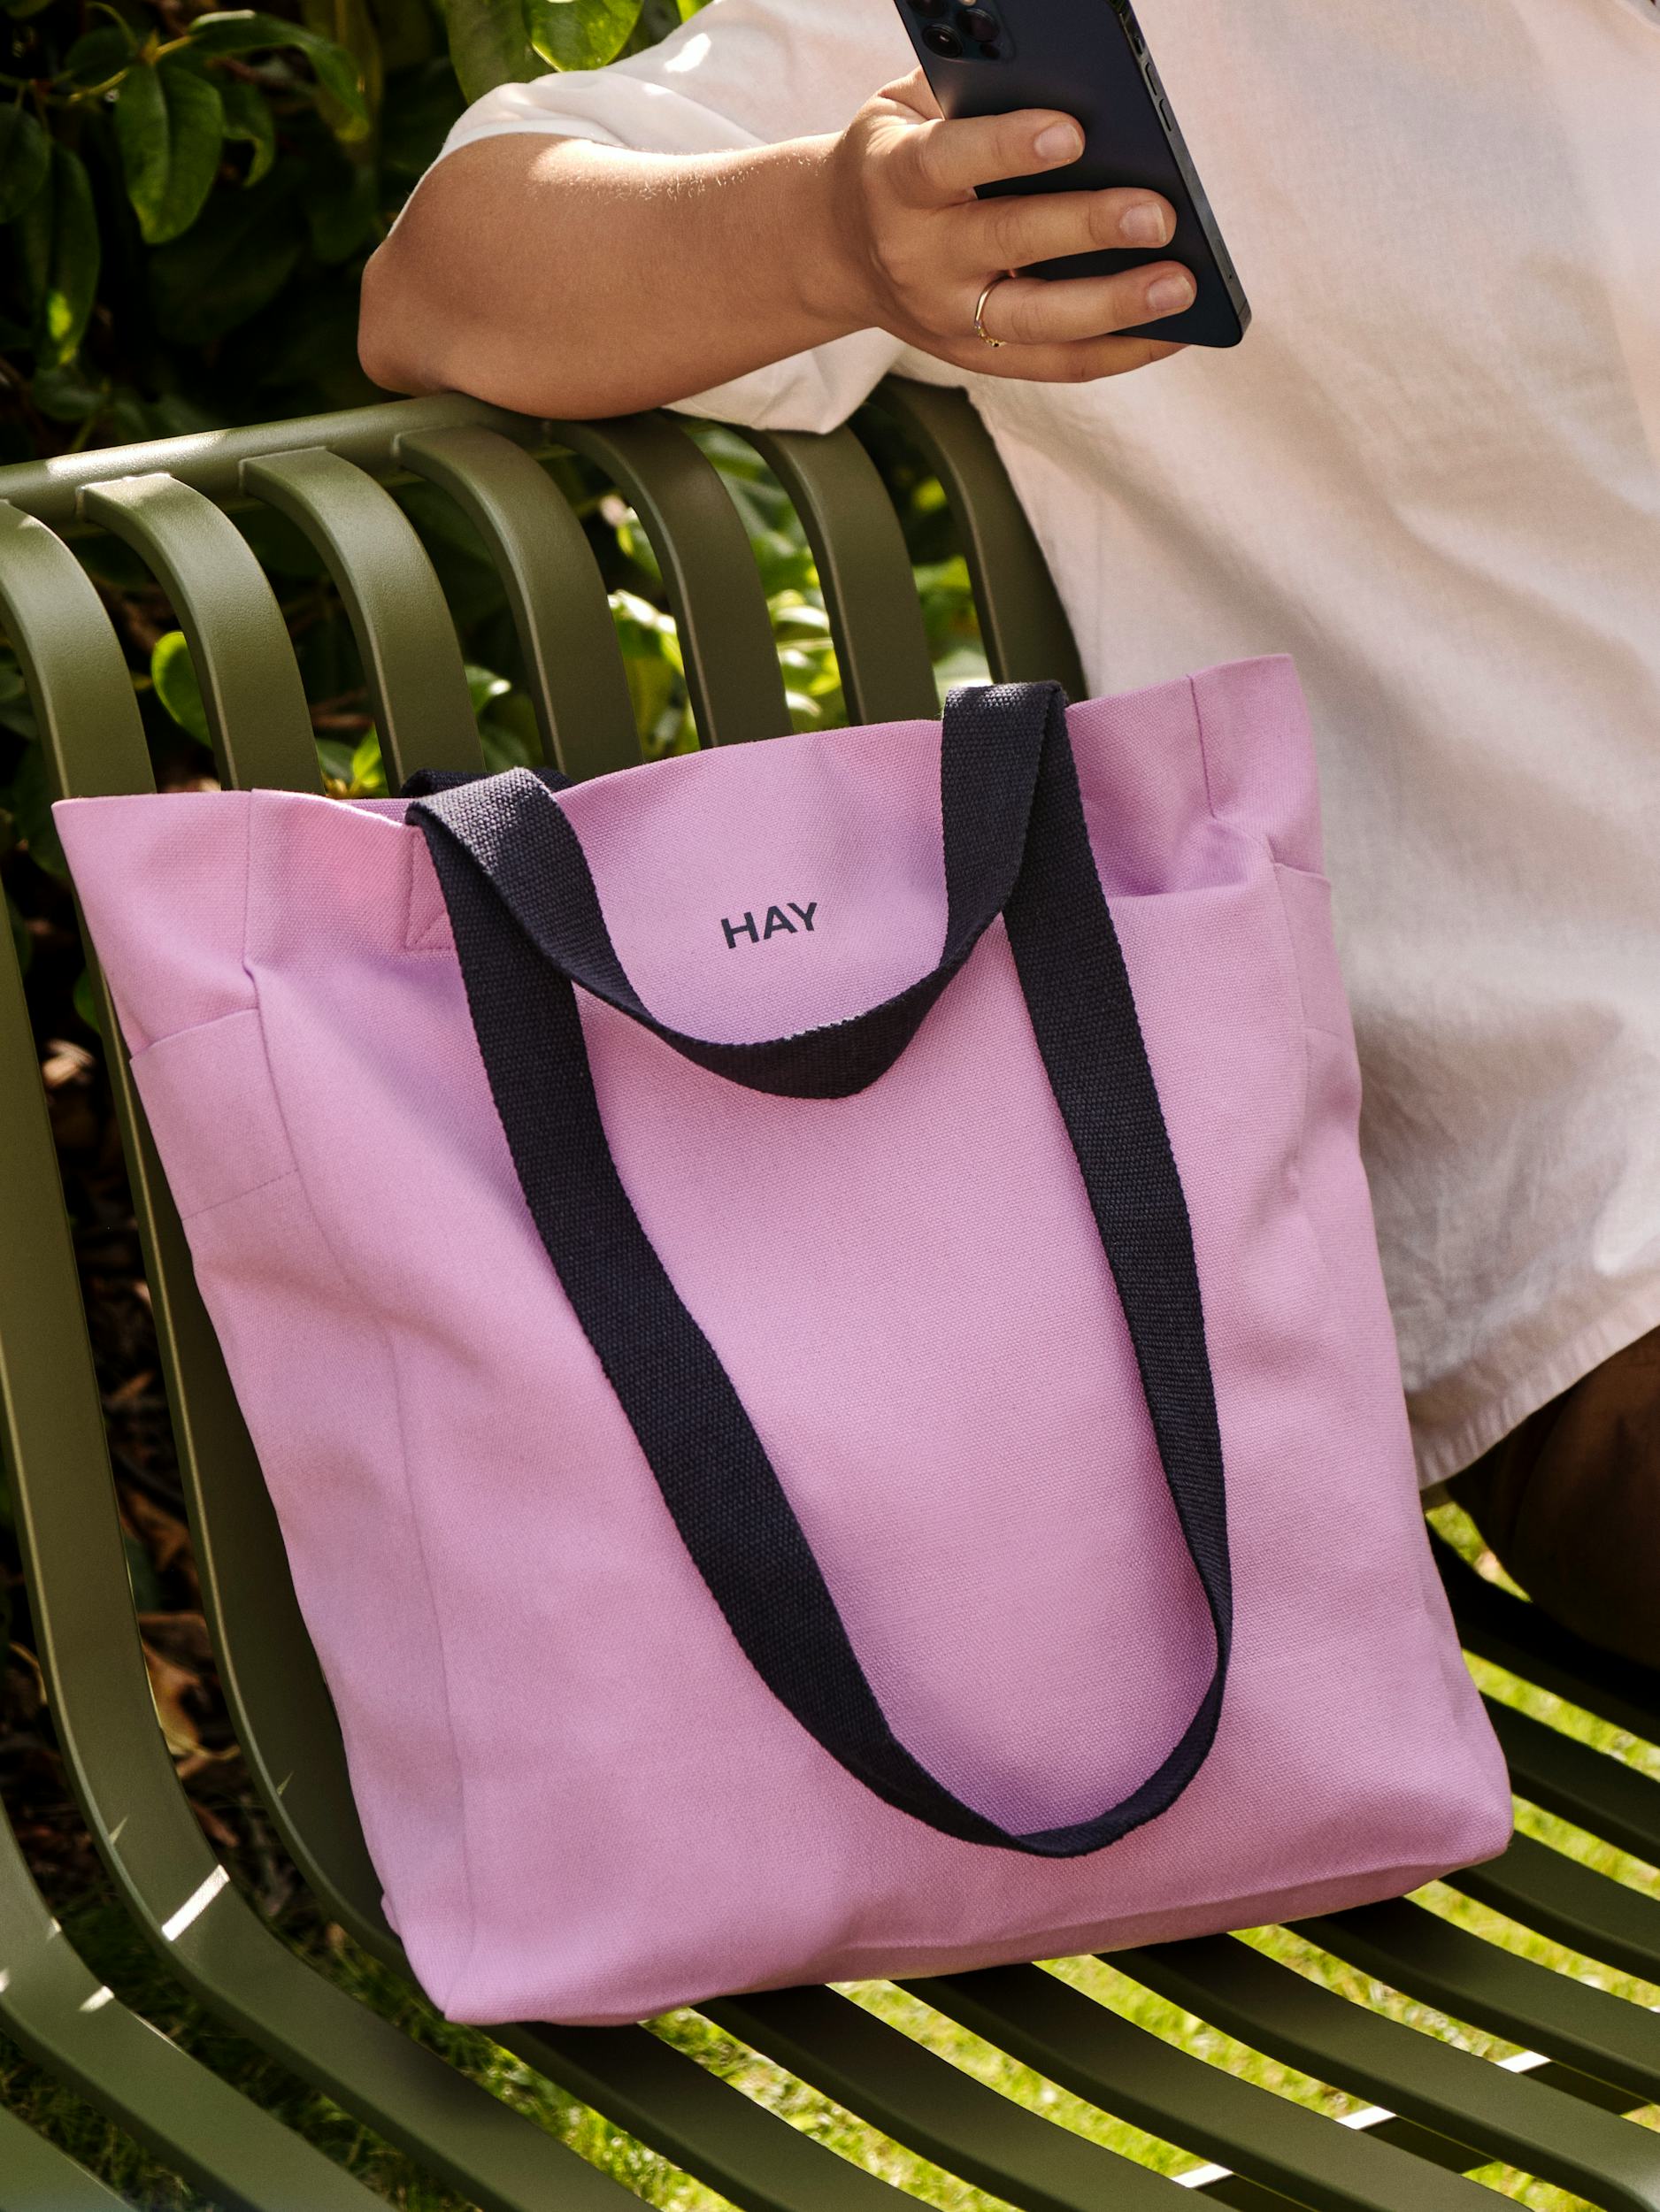 Hermès Garden Party: The Ultimate Tote Bag